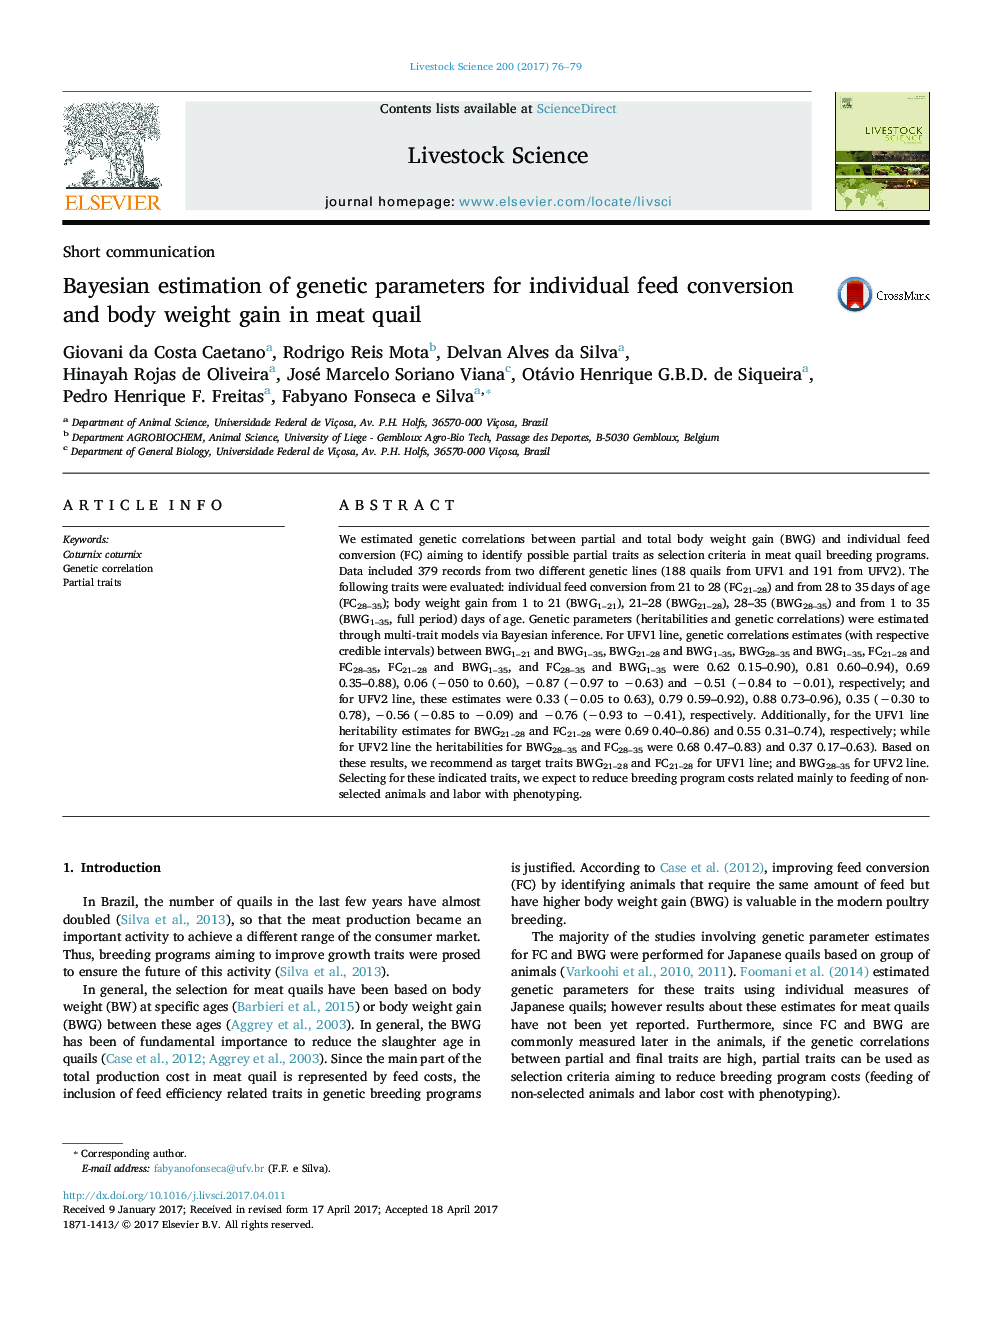 Bayesian estimation of genetic parameters for individual feed conversion and body weight gain in meat quail